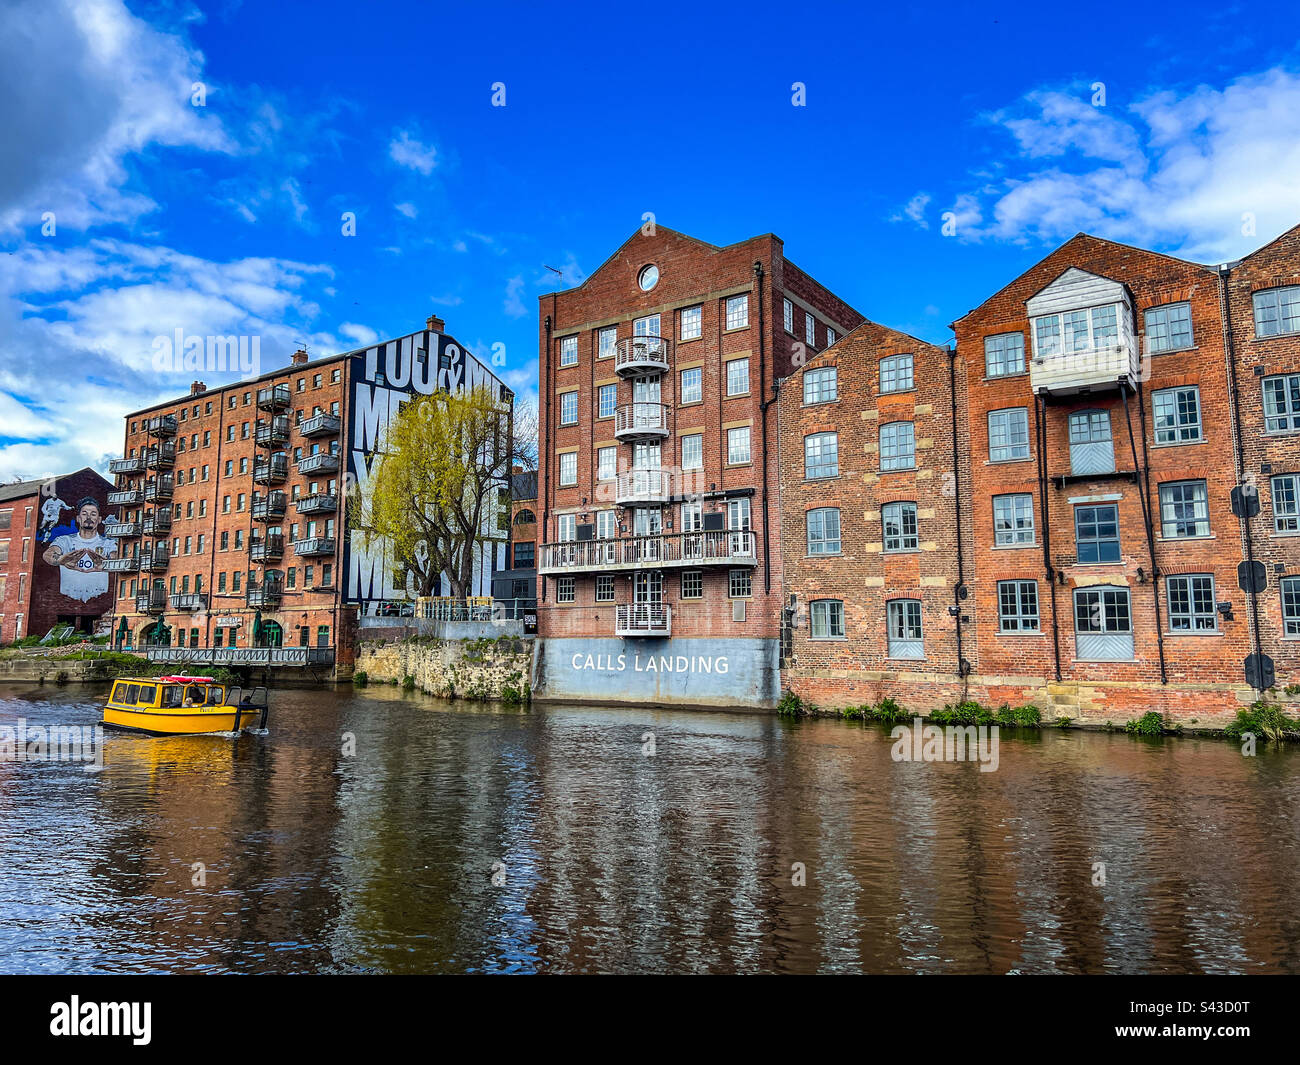 Calls landing apartments on the River Aire in Leeds City Centre Stock Photo